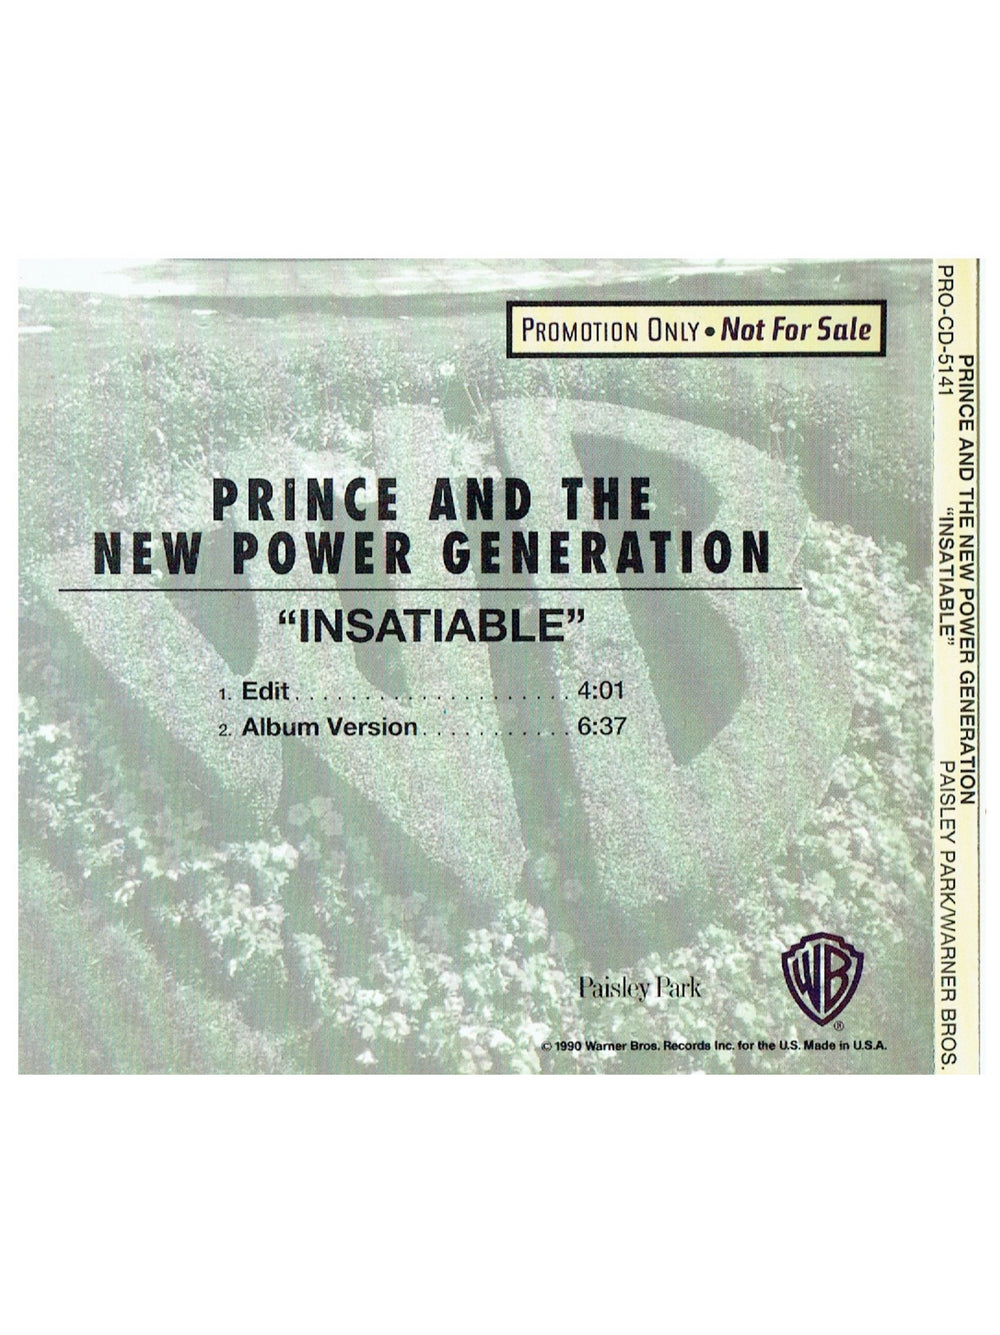 Prince – & The New Power Generation – Insatiable CD Single Promo US Preloved: 1991